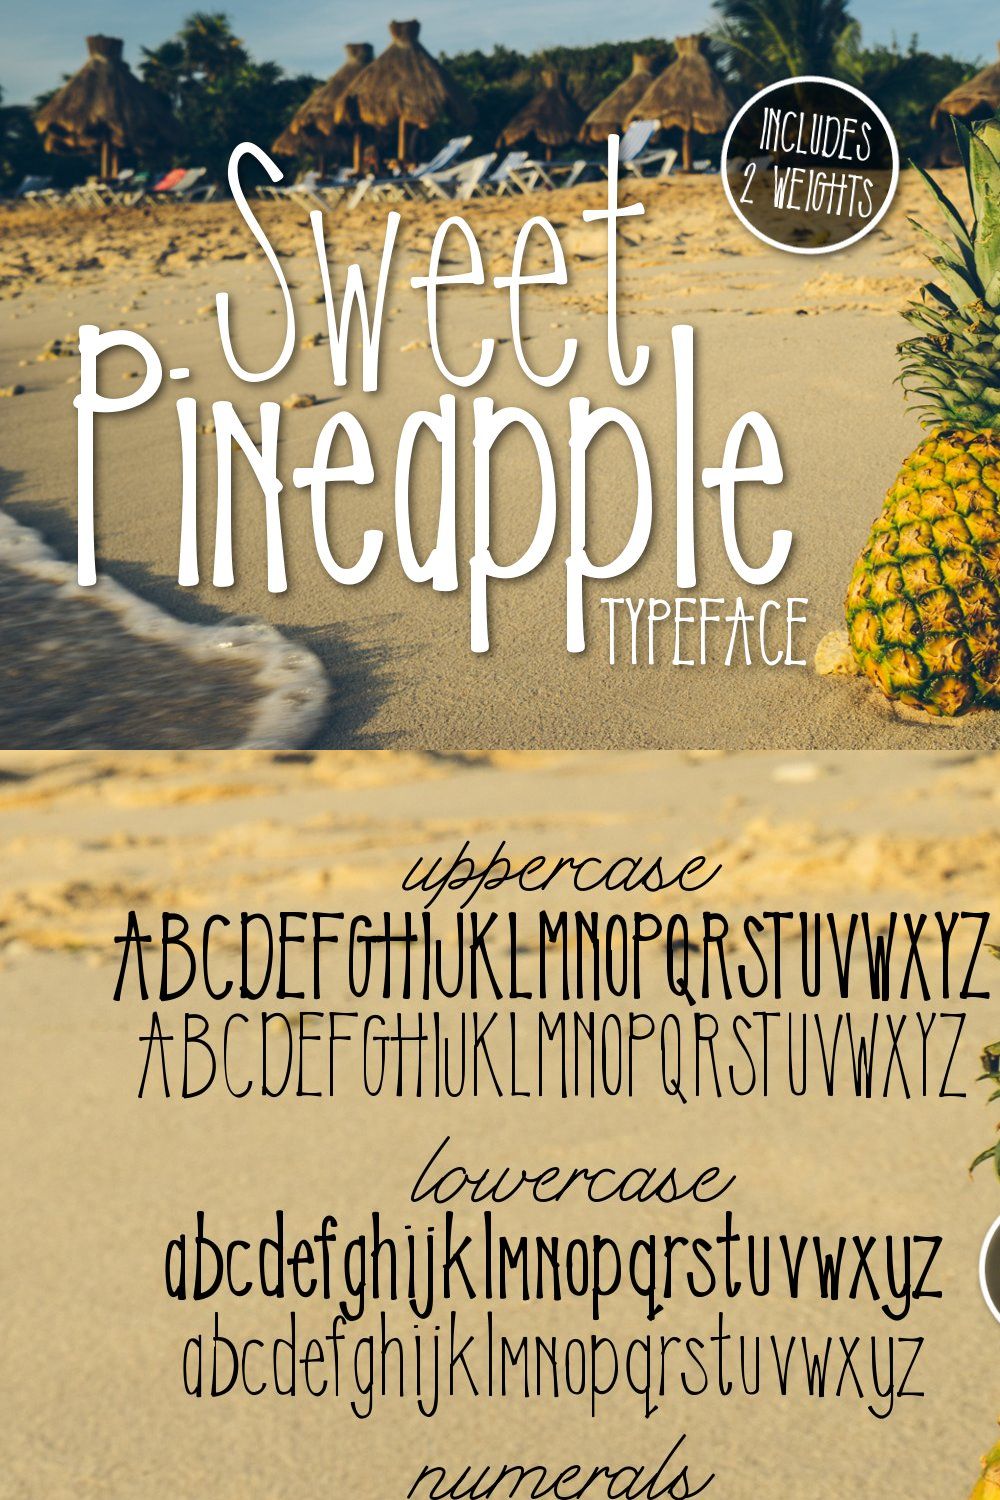 Sweet Pineapple Typeface pinterest preview image.